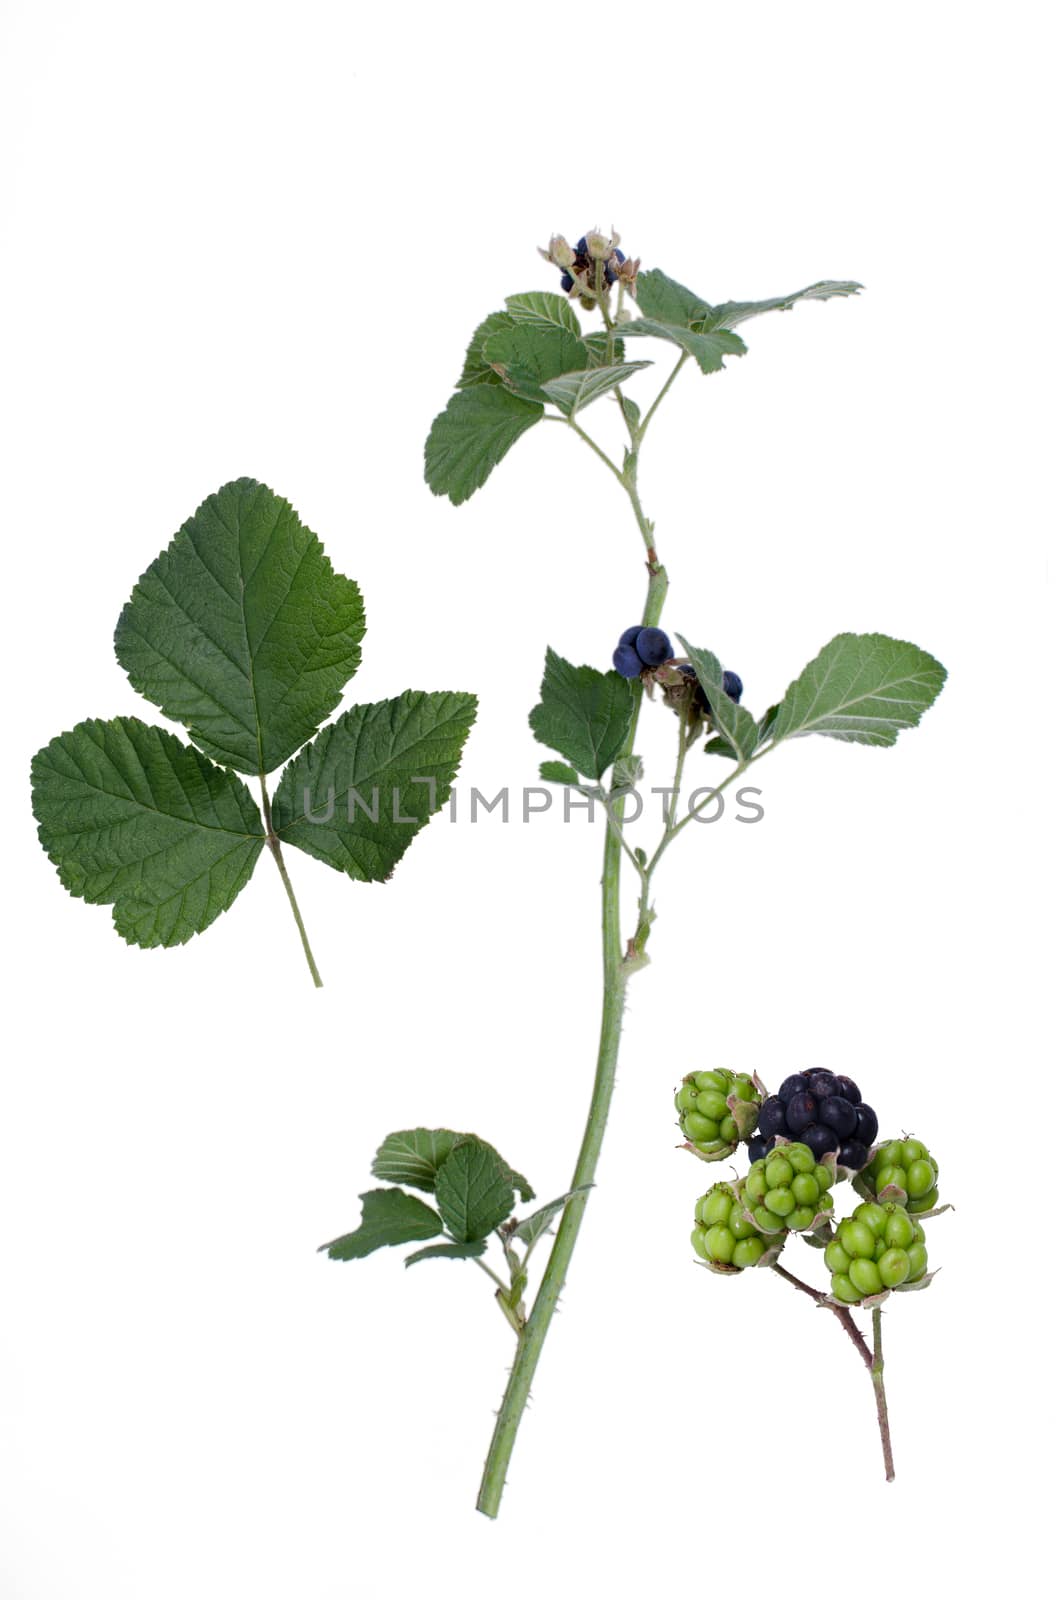 Blackberry plant and detail of leaf and berries isolated on white background.